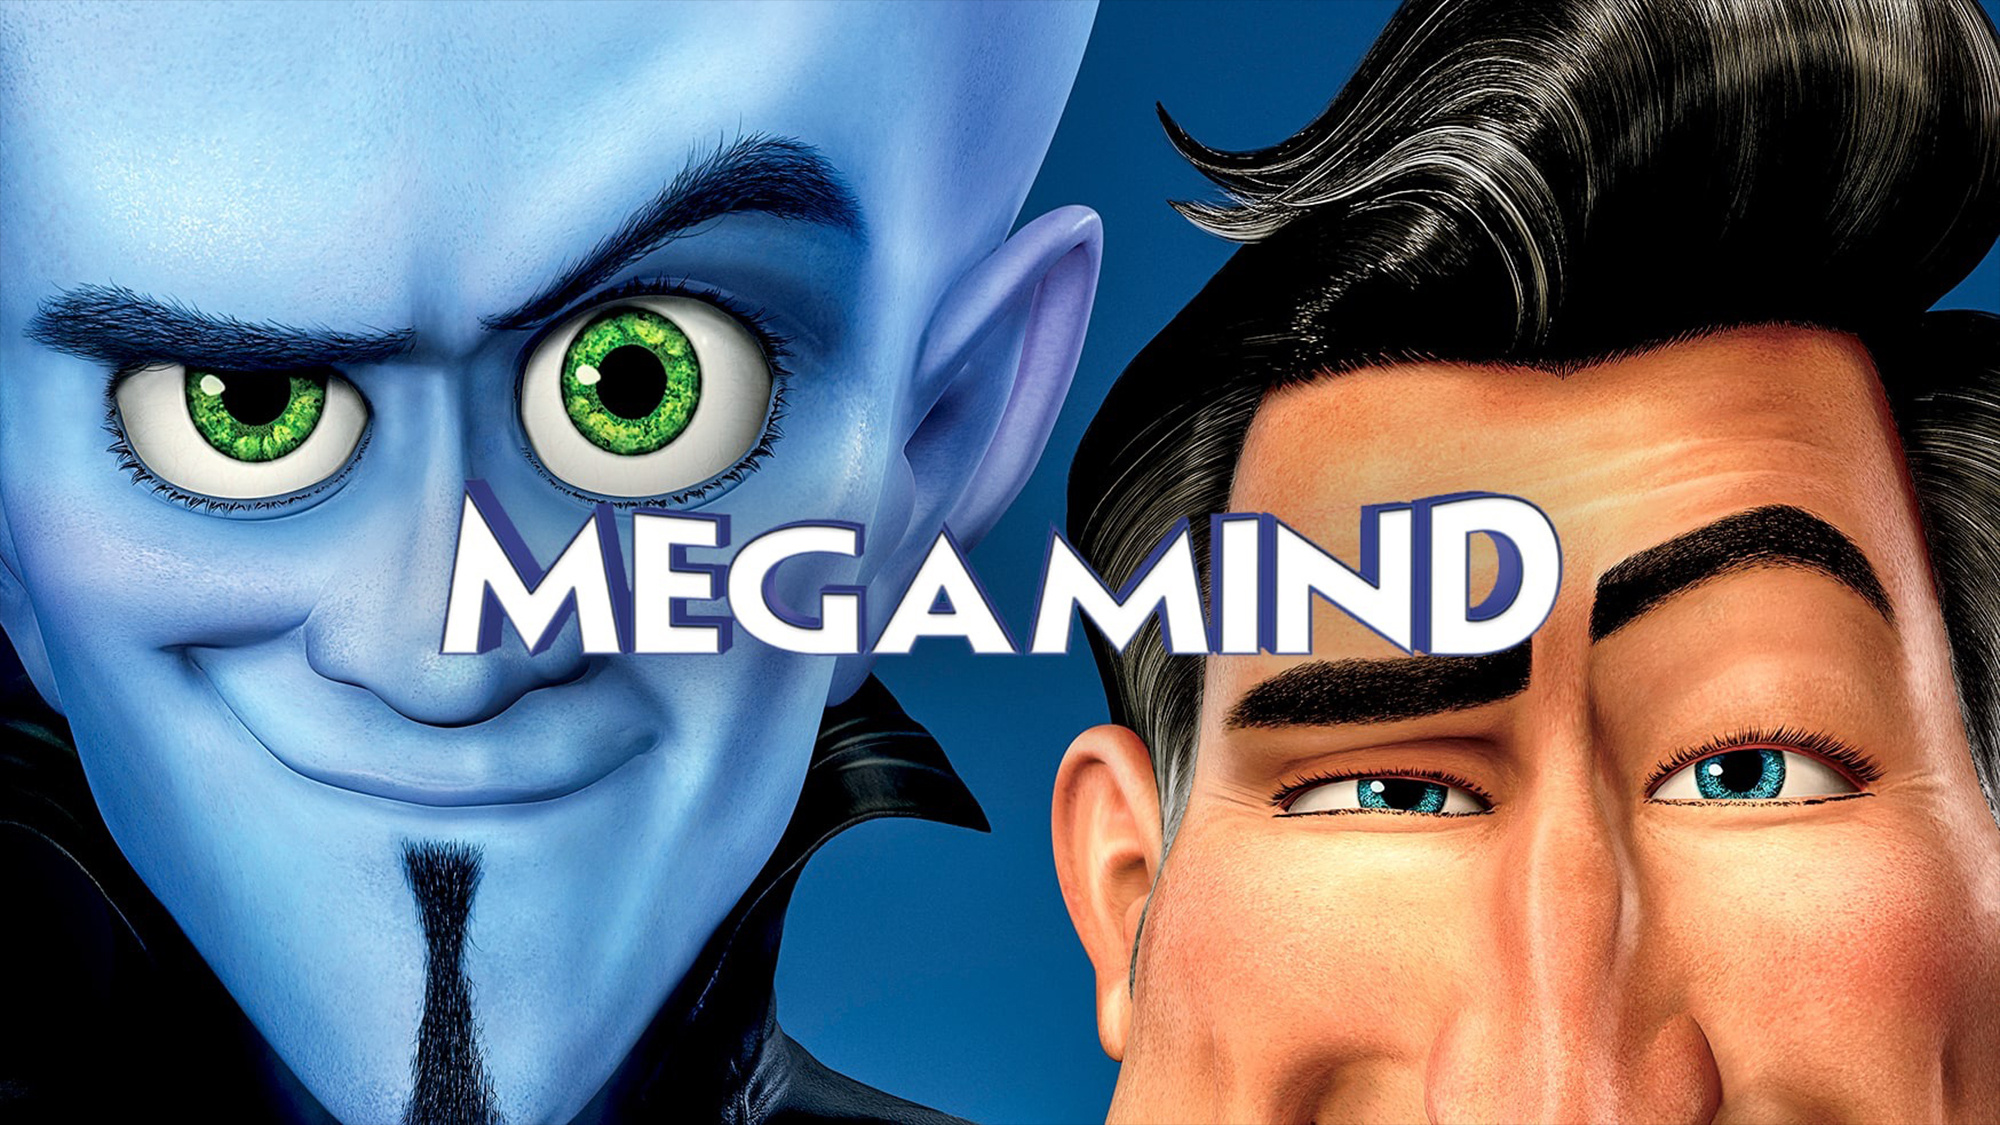 Megamind, Animation, Captivating wallpapers, Eye-catching images, 2000x1130 HD Desktop